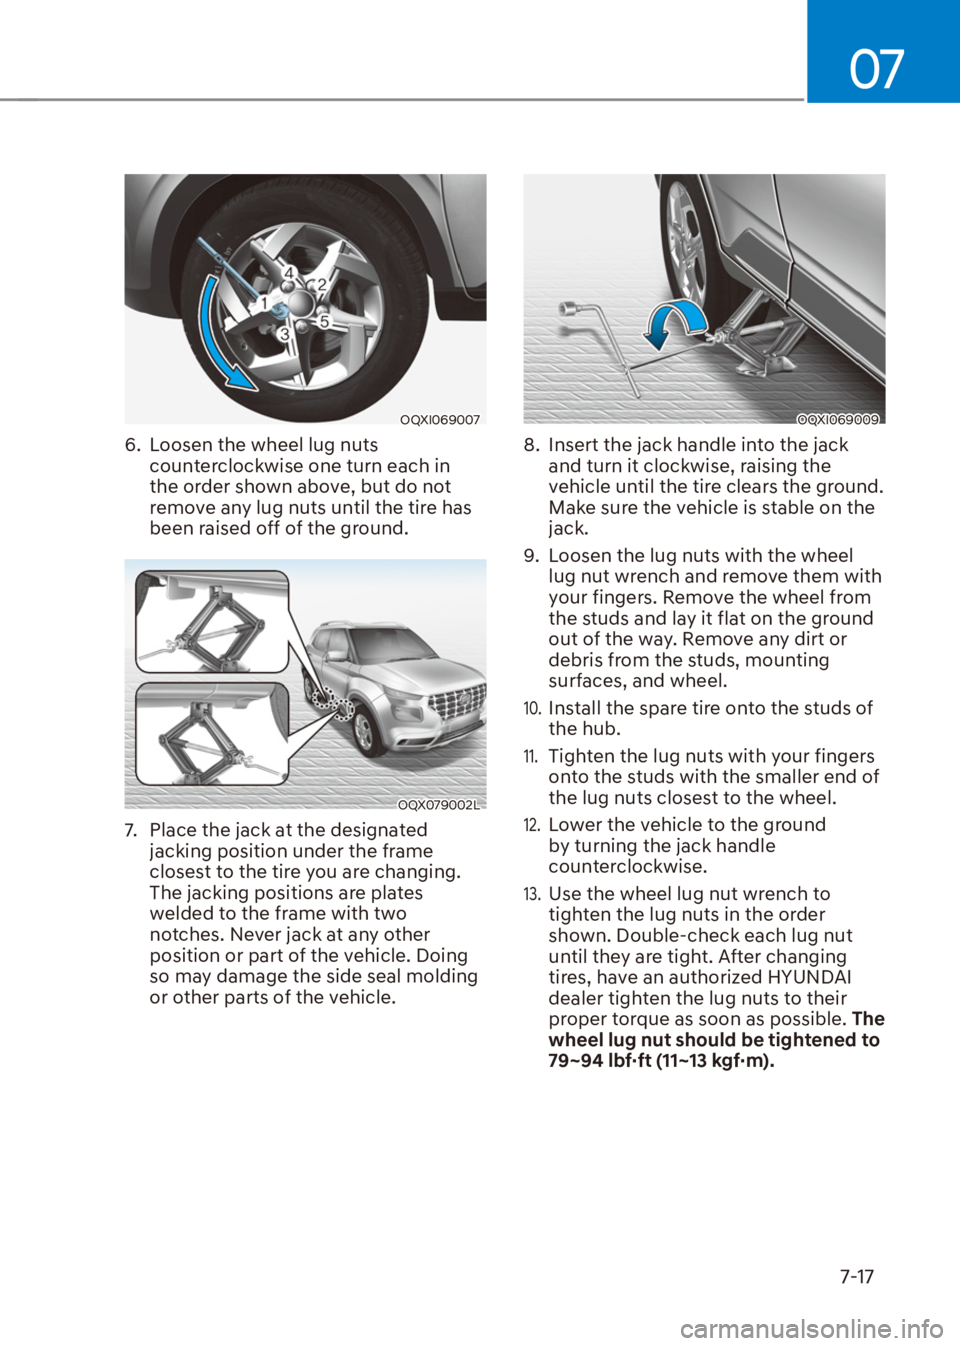 HYUNDAI VENUE 2021  Owners Manual 07
7-17
OQXI069007
6.  Loosen the wheel lug nuts 
counterclockwise one turn each in 
the order shown above, but do not 
remove any lug nuts until the tire has 
been raised off of the ground.
OQX079002